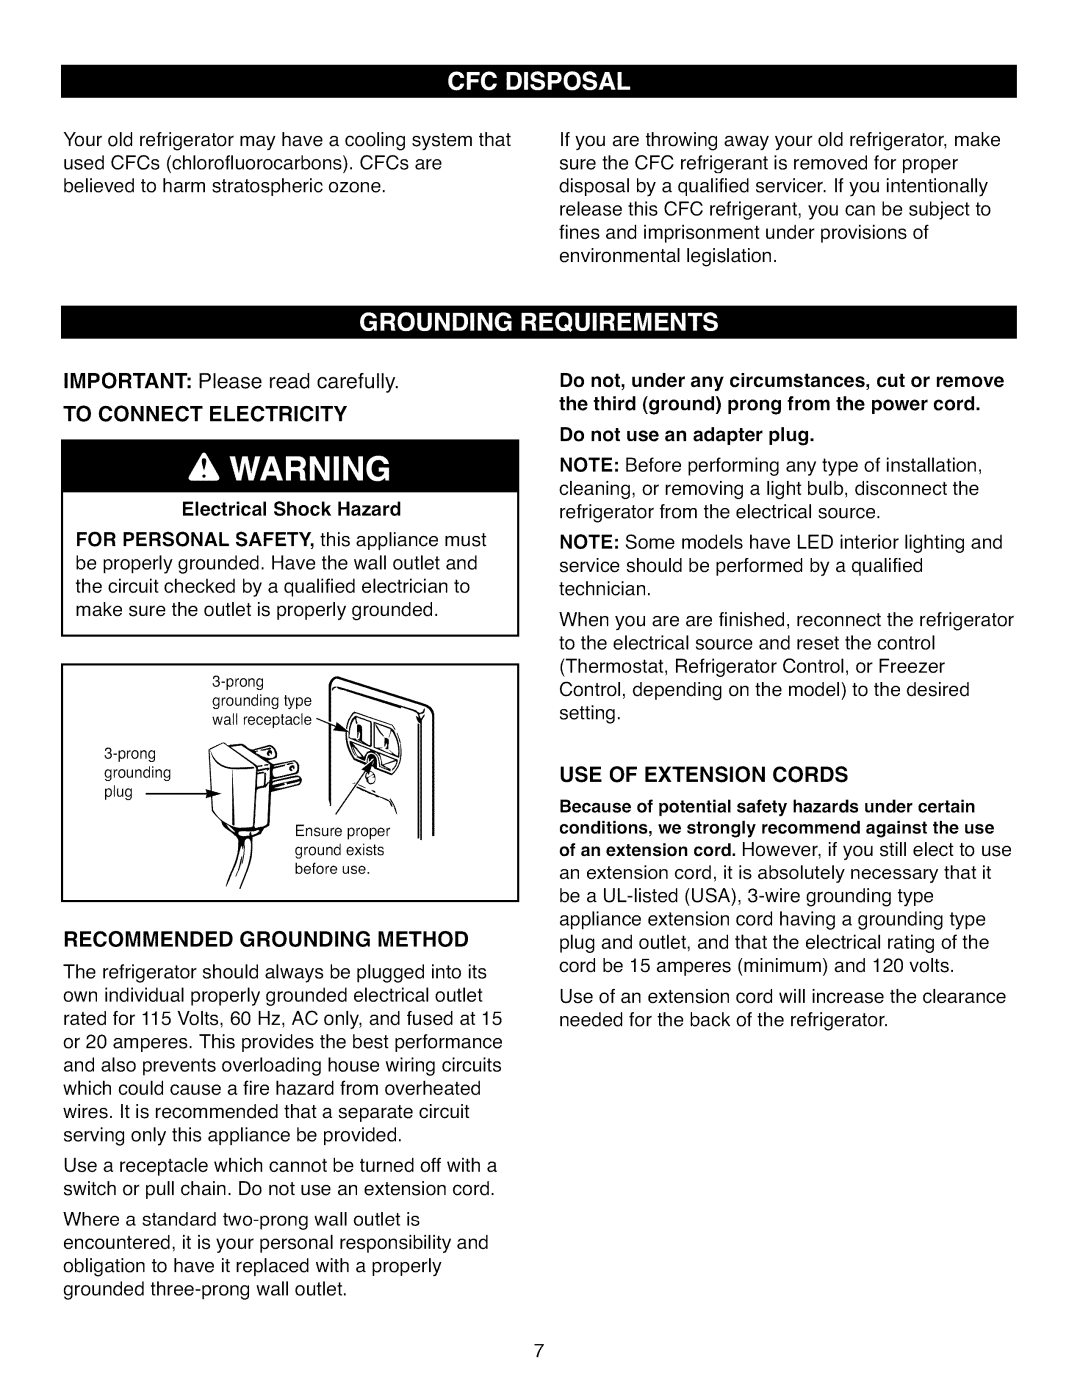 Kenmore 795.7104 manual IMPORTANT: Please read carefully, To Connect Electricity, Recommended Grounding Method 